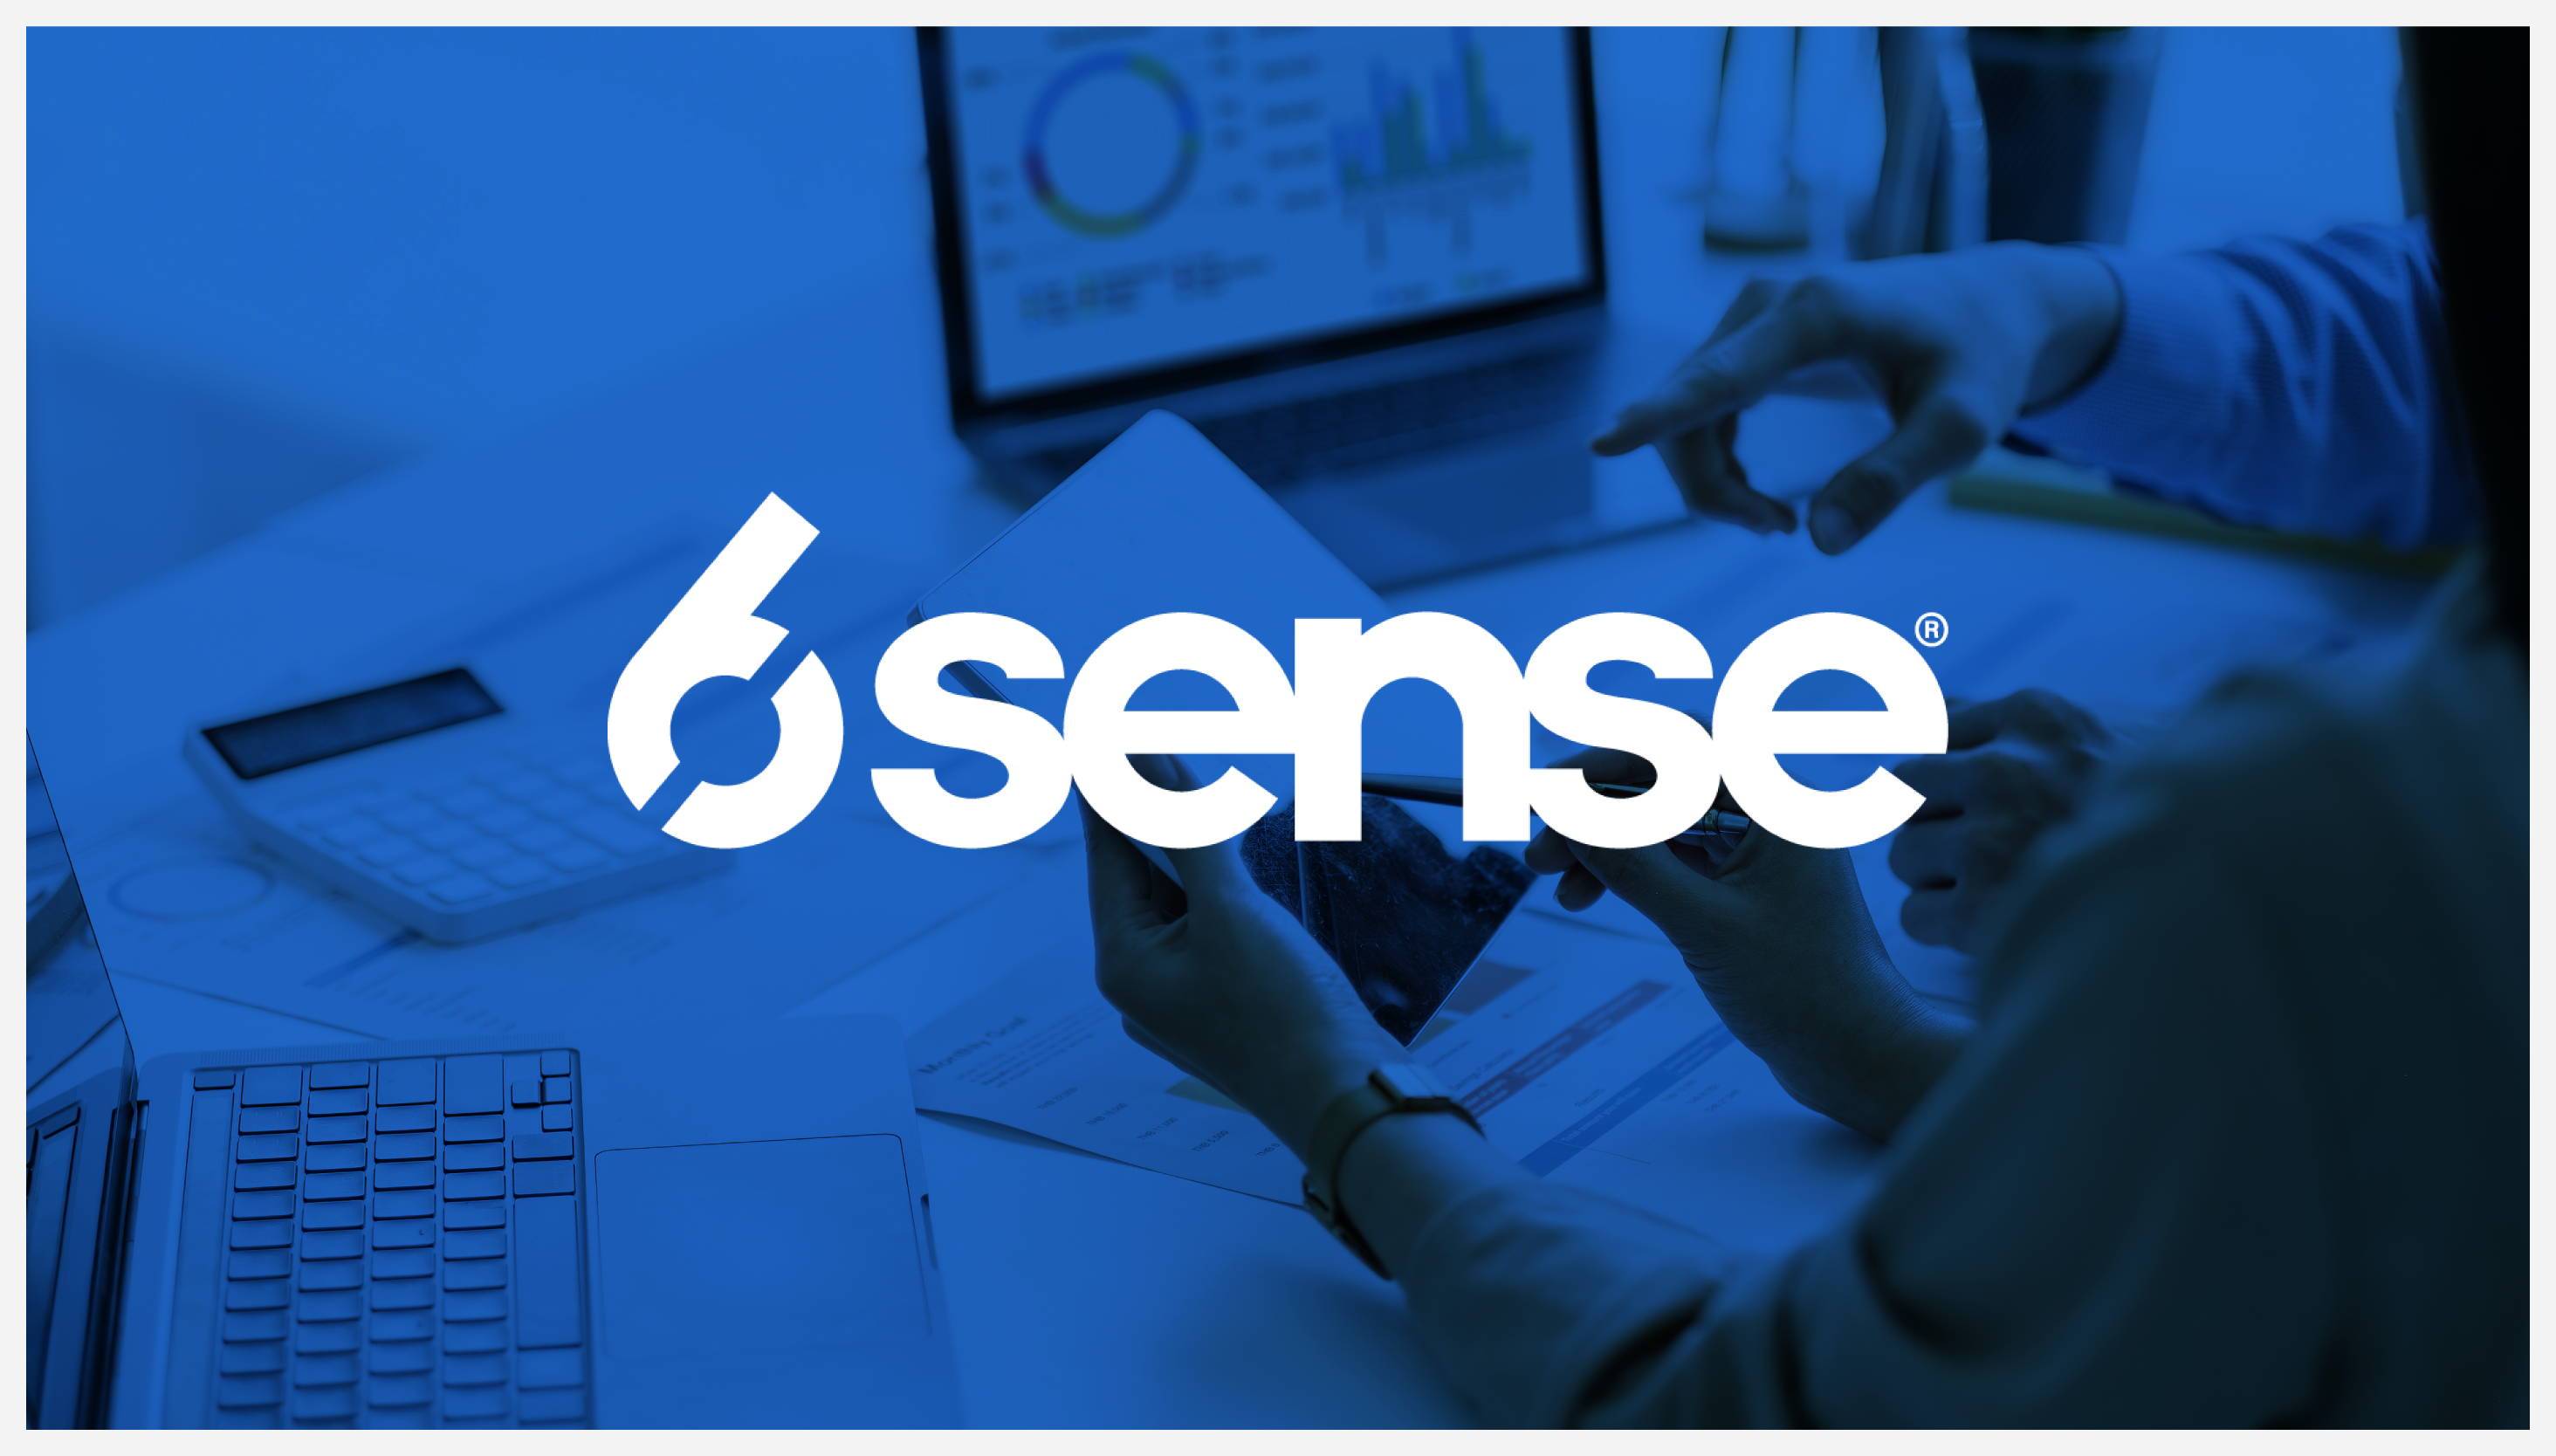 6sense logo overlapping a photograph of two revenue professionals looking at reports in front of two laptops